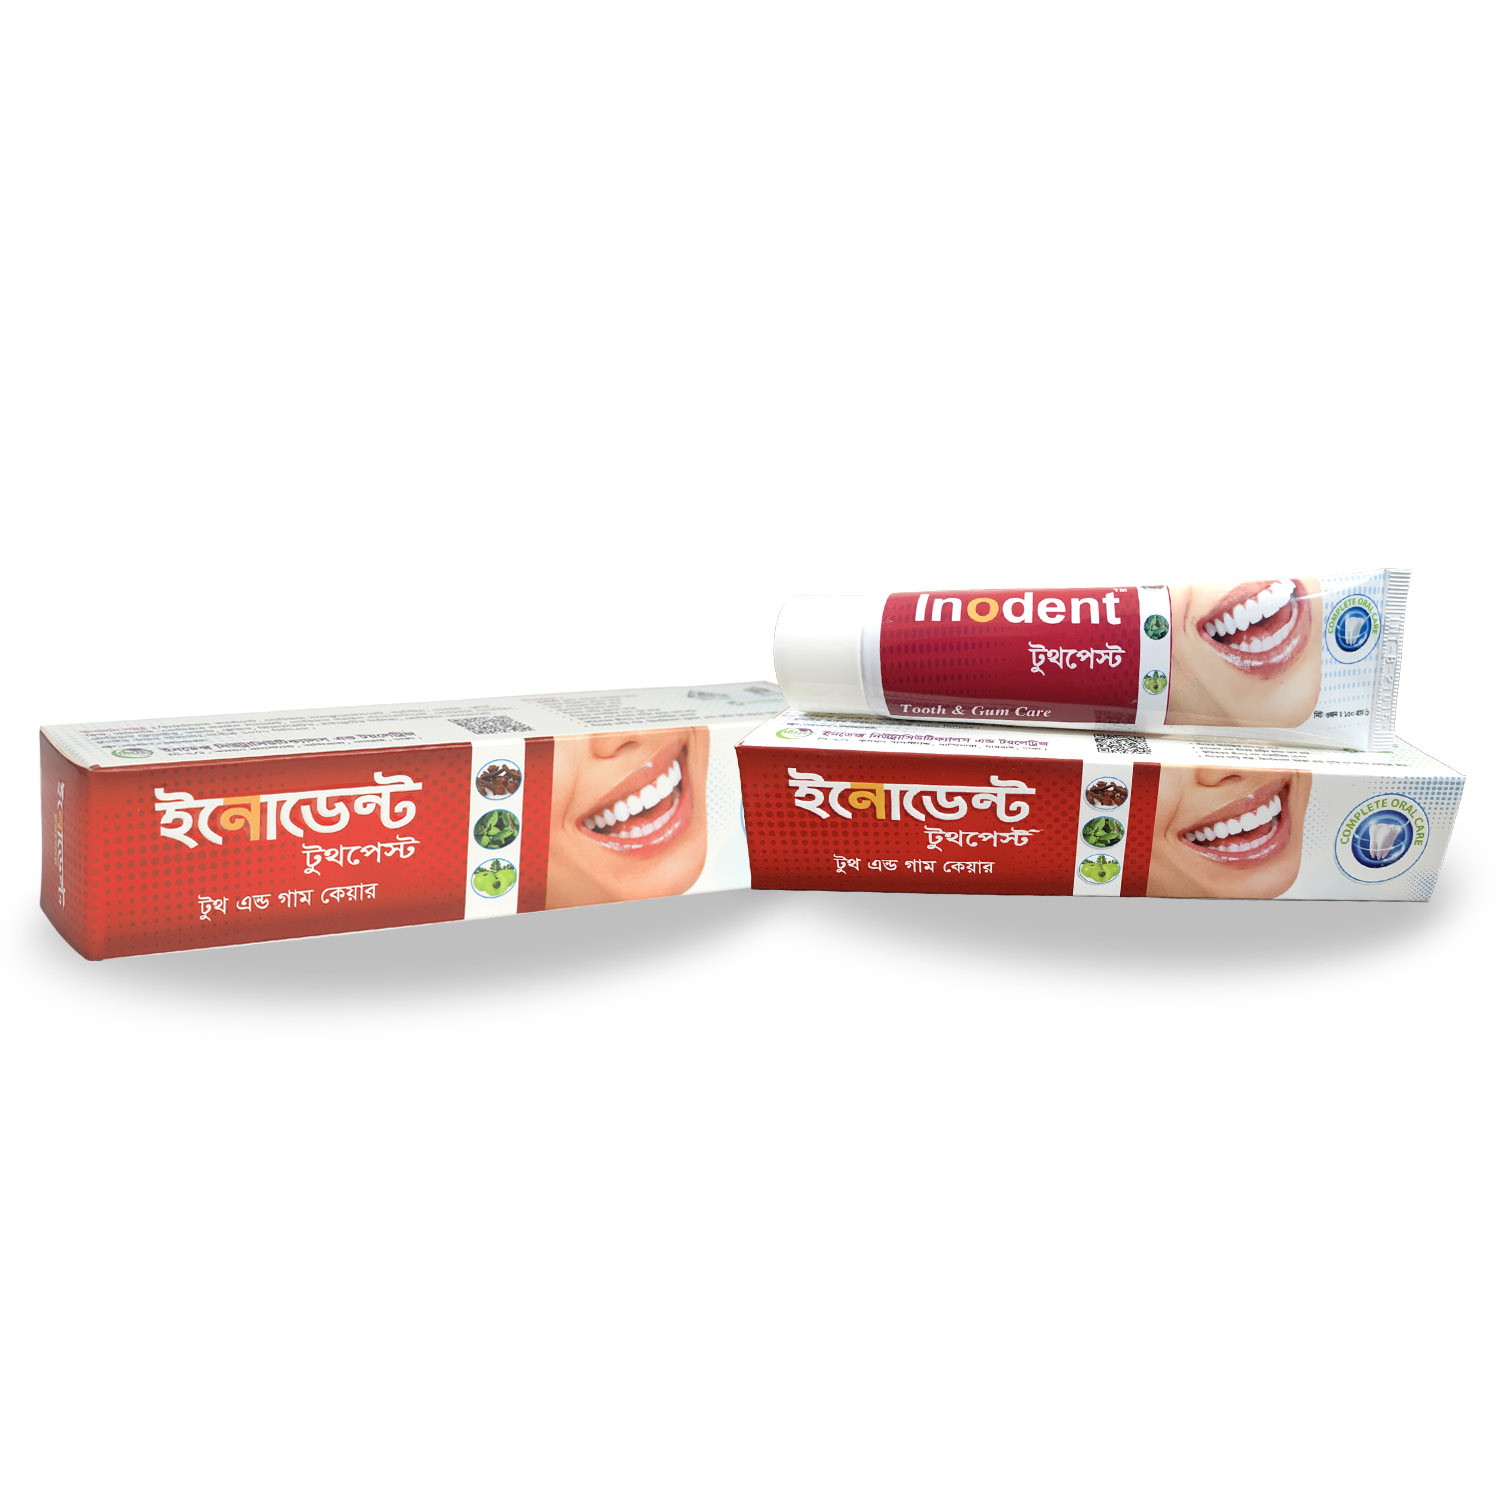 Inodent Tooth Paste